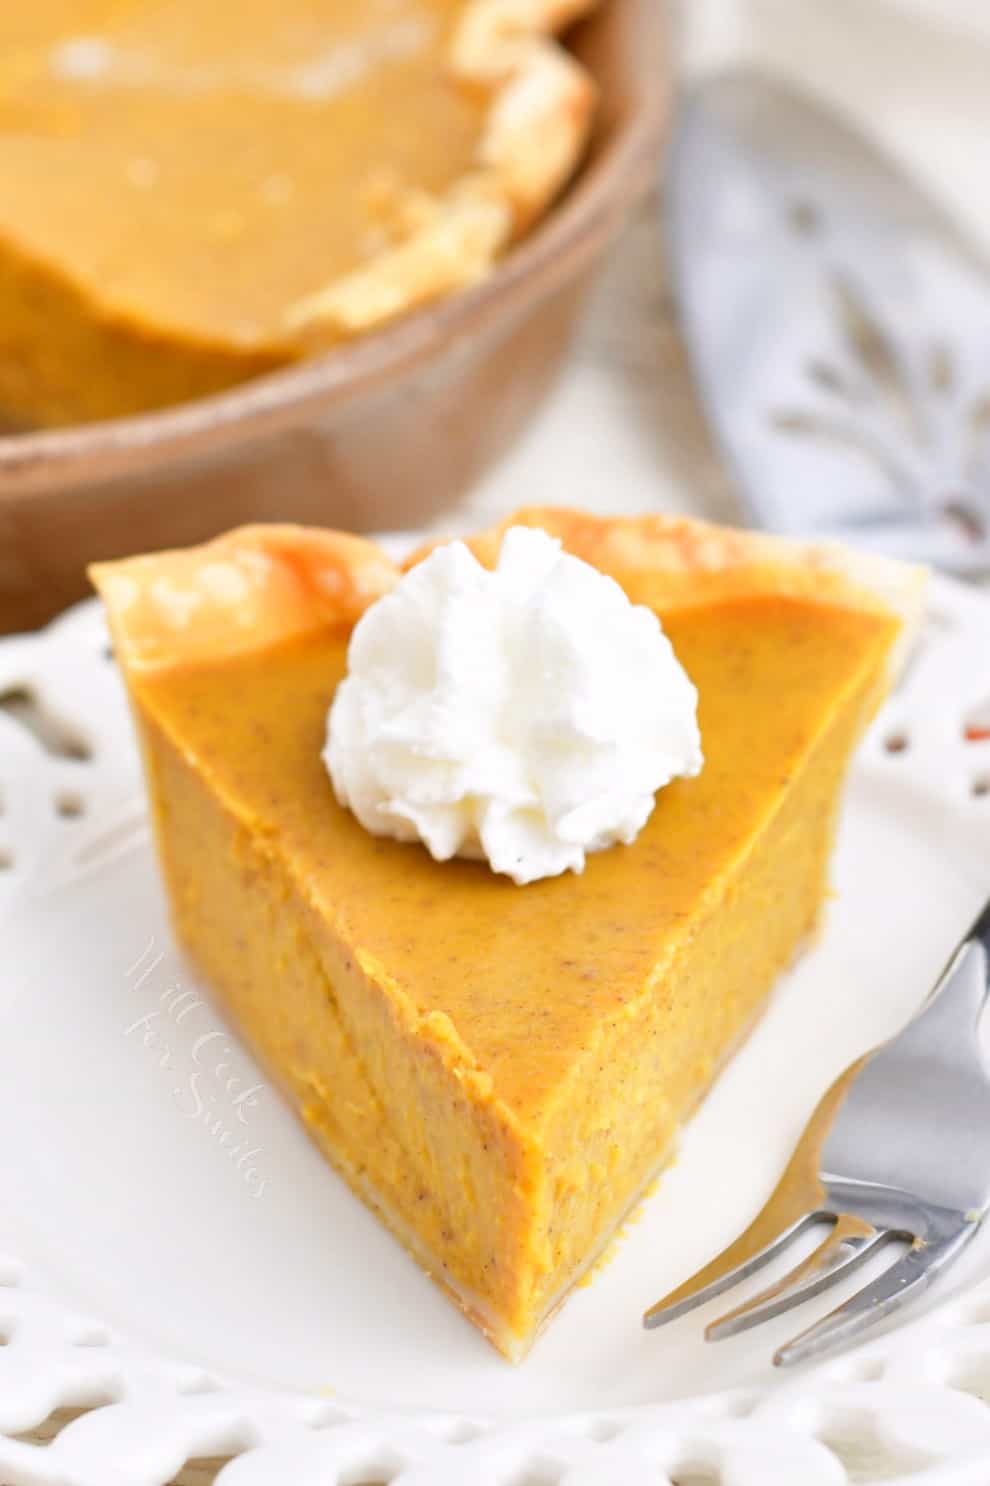 Greatest Pumpkin Pie Recipe - Will Cook For Smiles